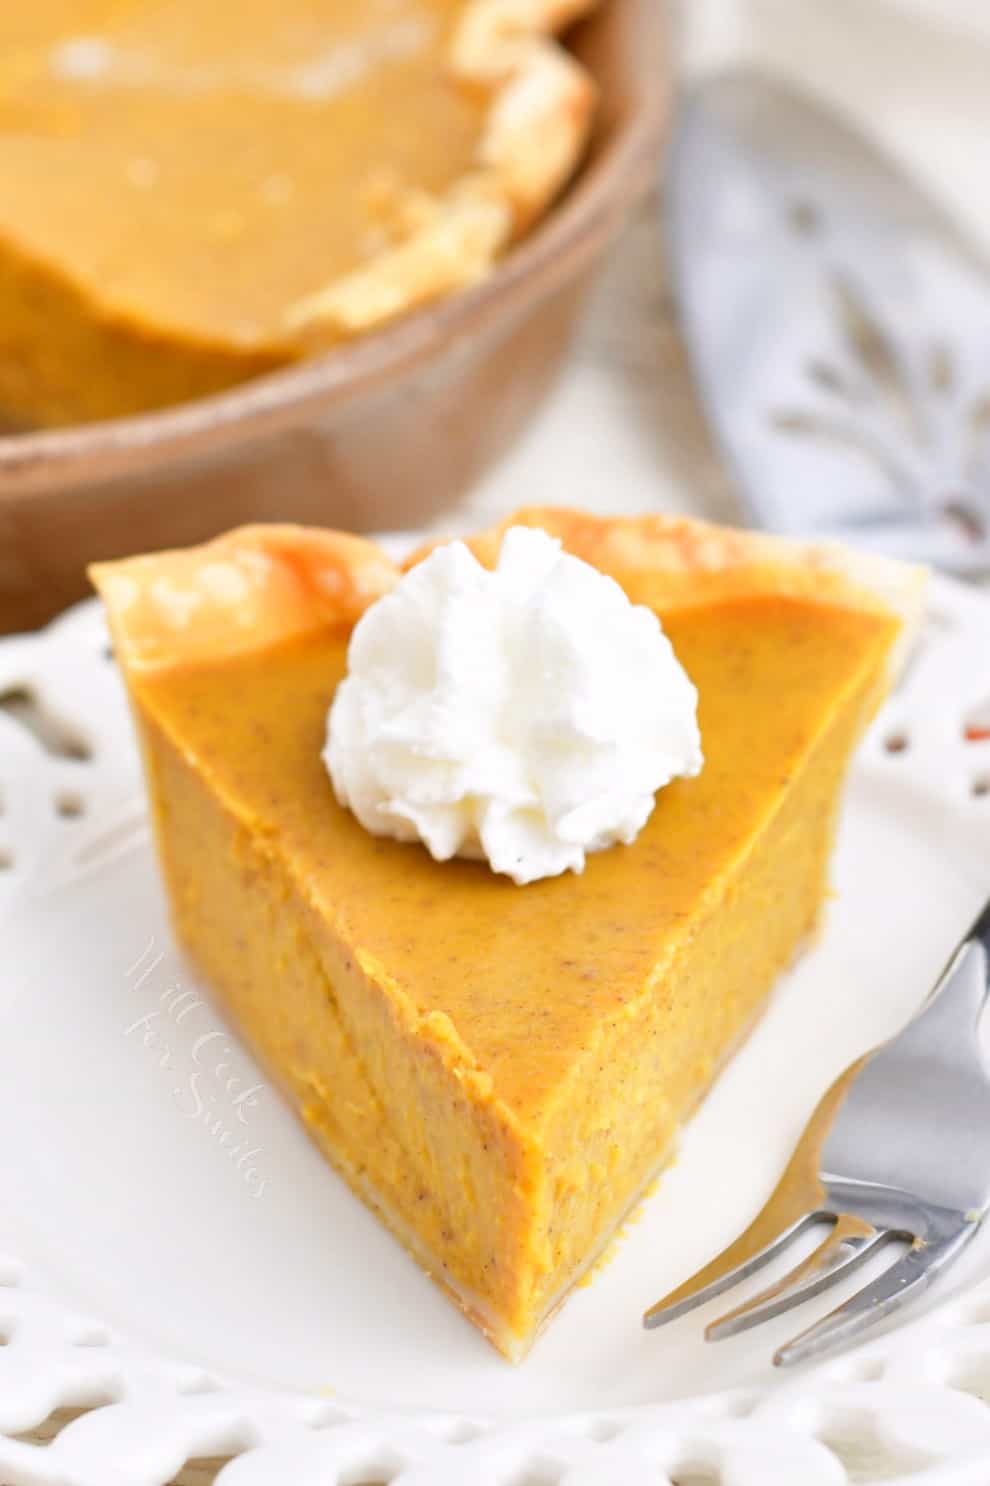 Greatest Pumpkin Pie Recipe - Will Cook For Smiles